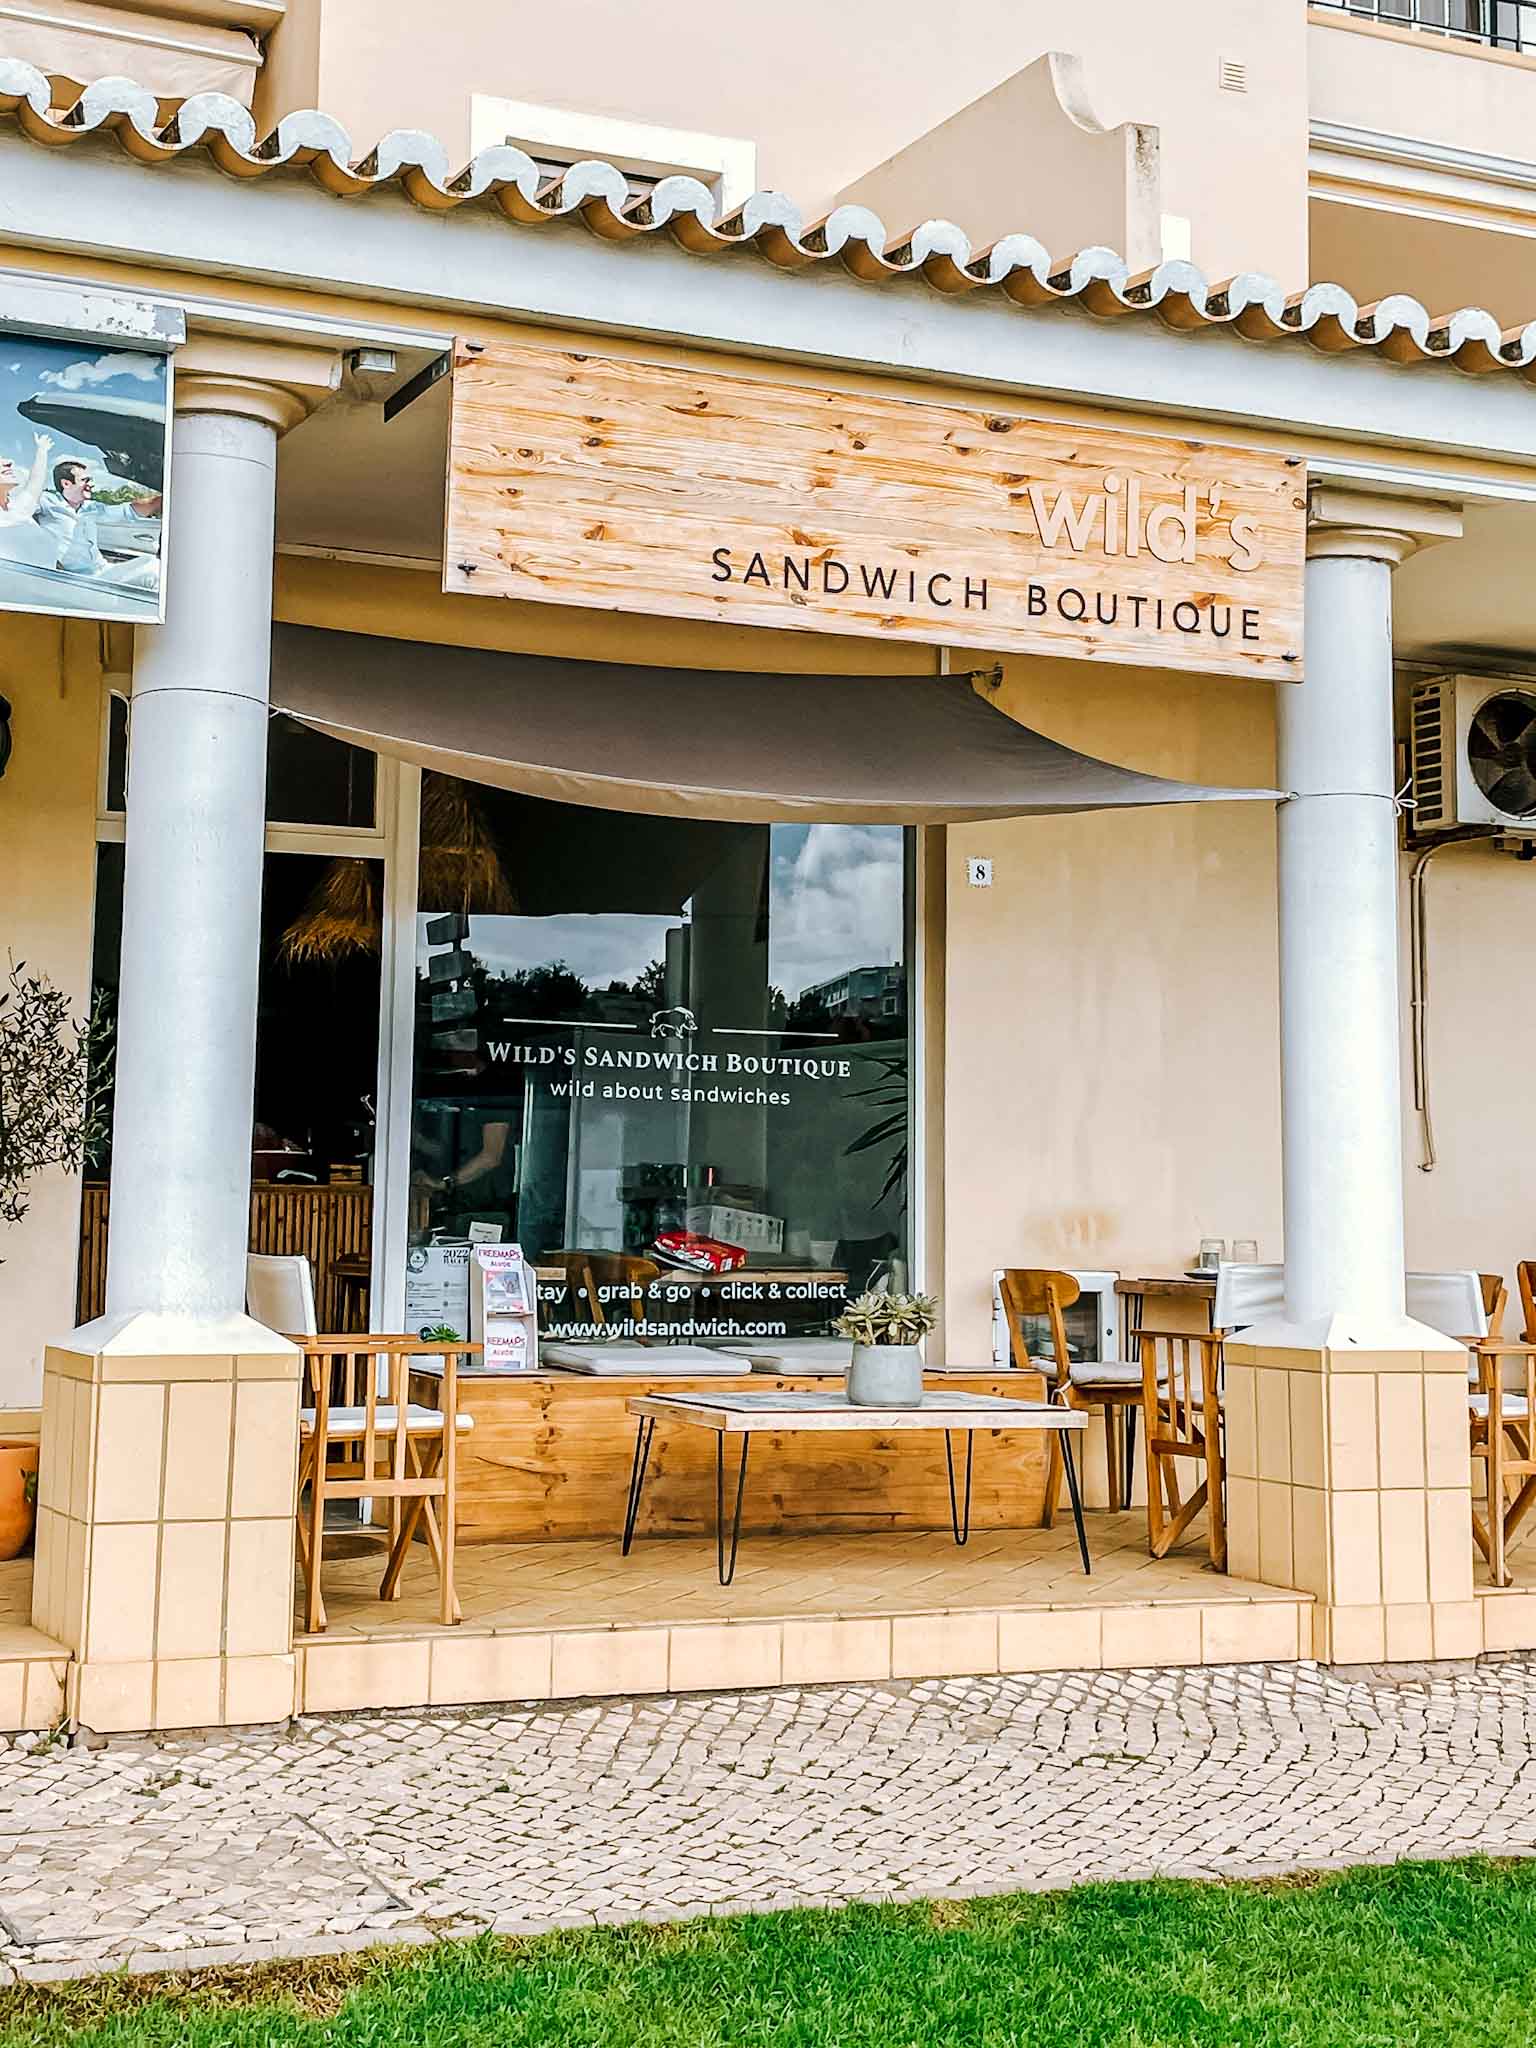 Breakfast and brunch places in Algarve, Portugal